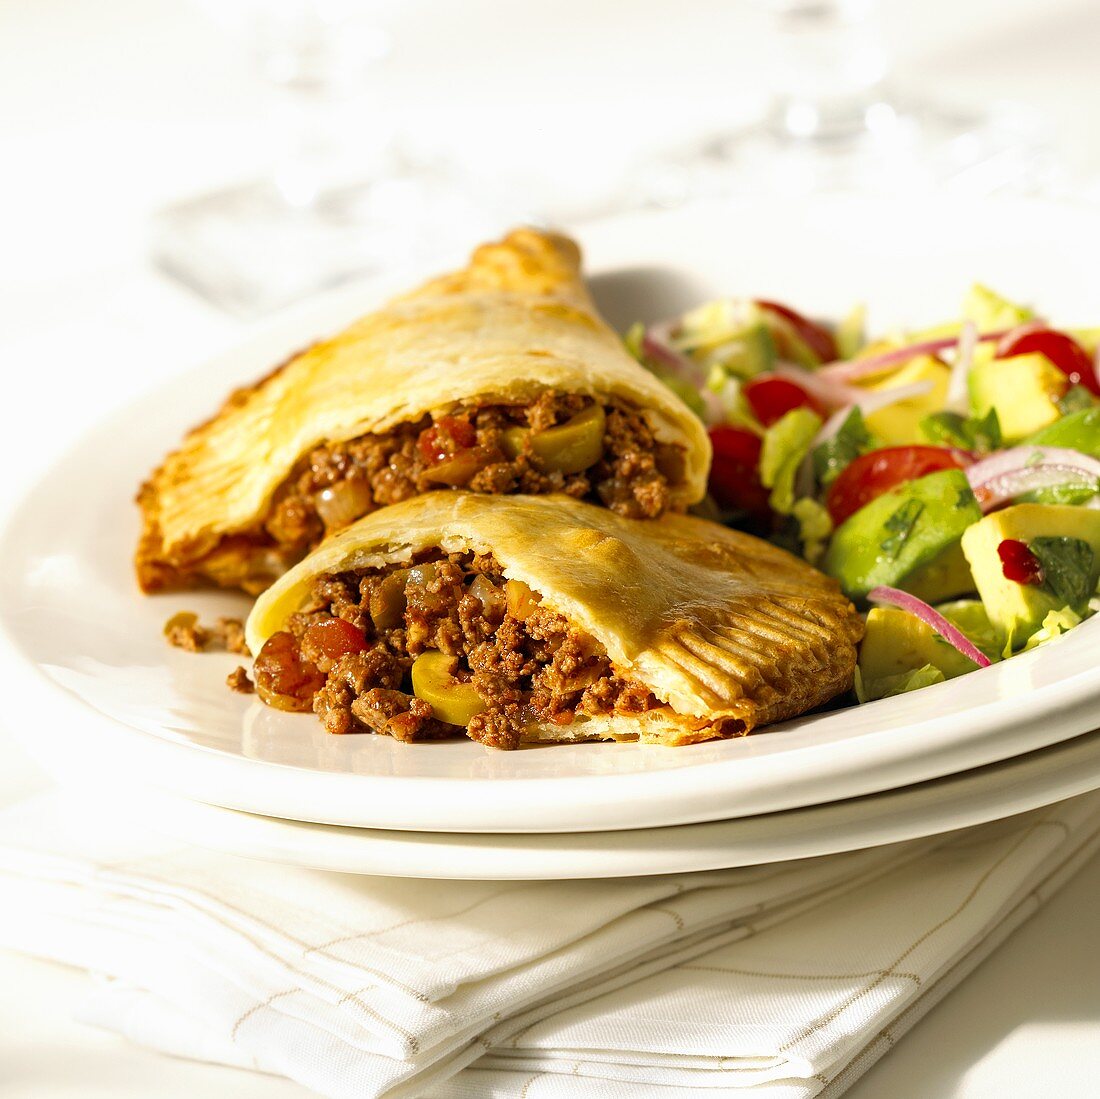 Empanadas with mince filling